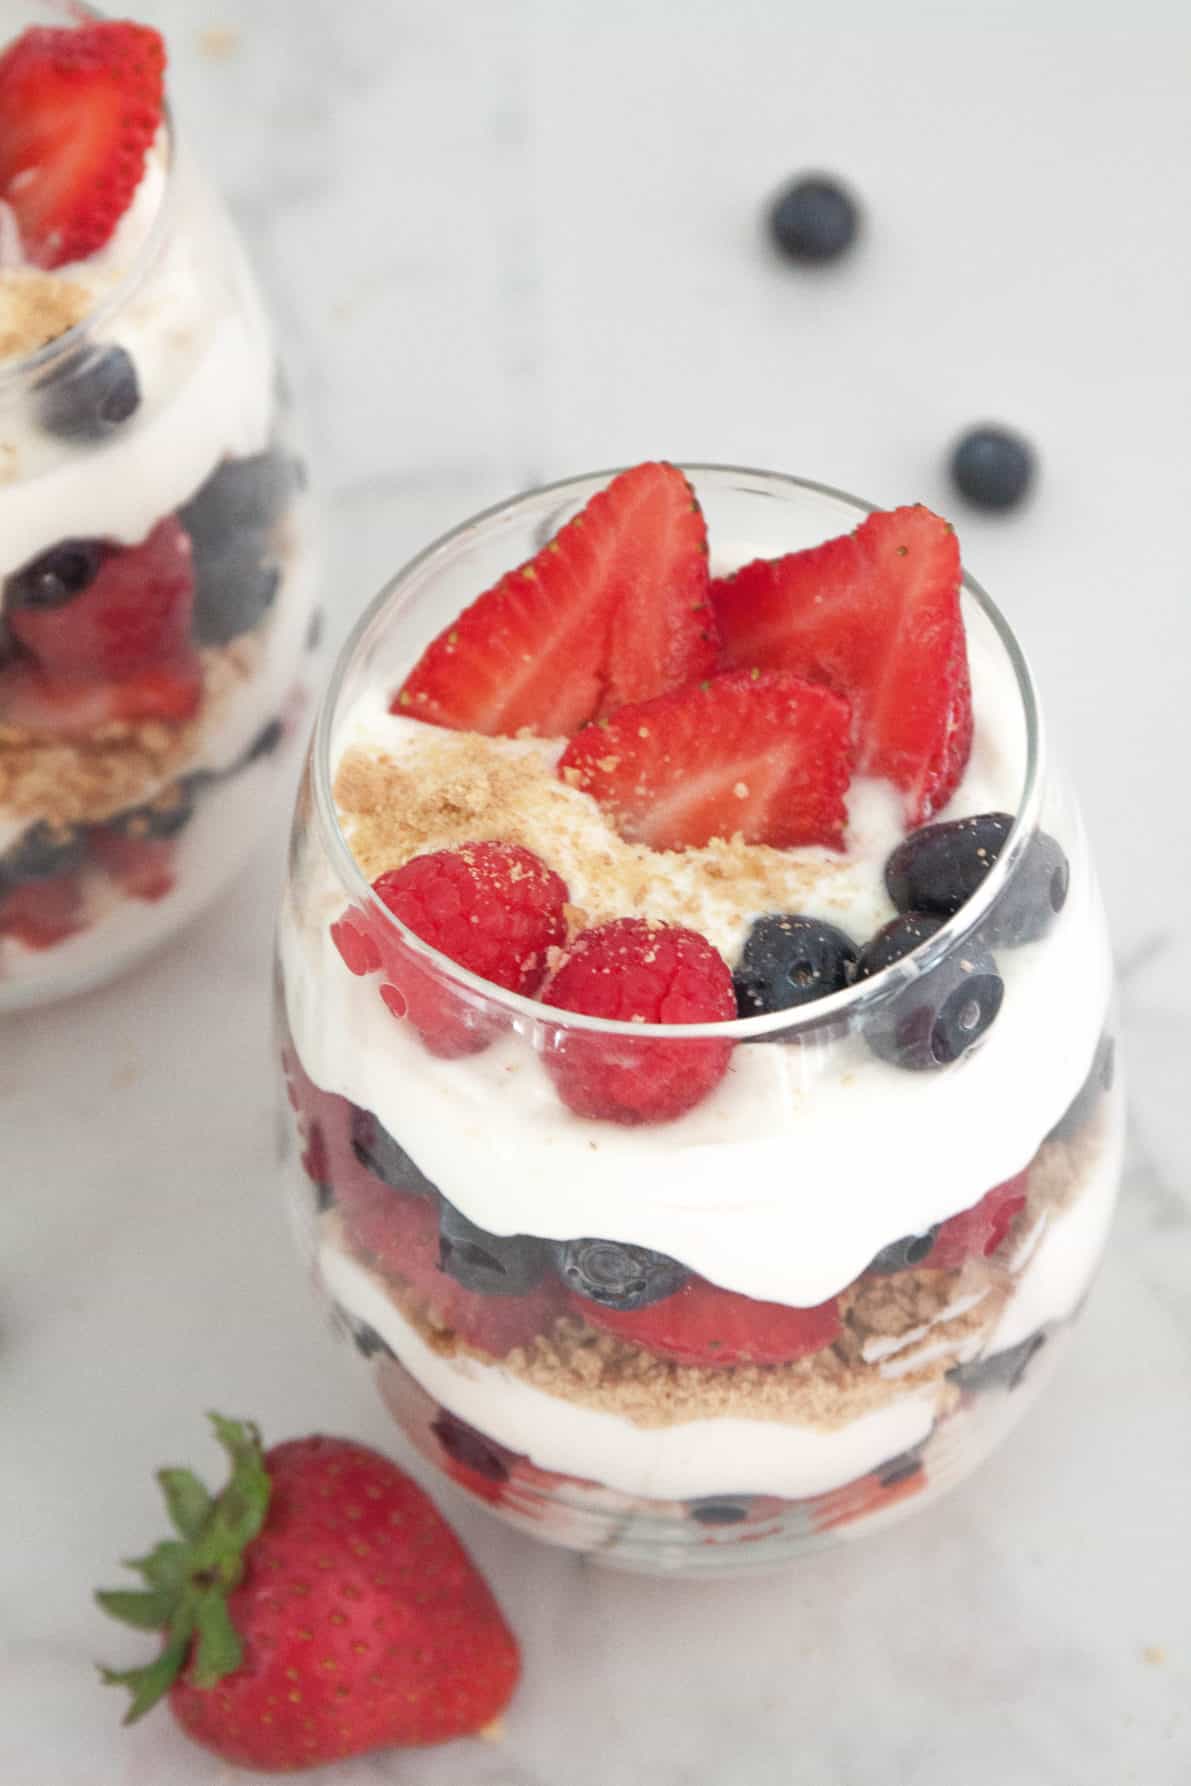 Berry Cheesecake Parfaits are an easy, no-bake dessert perfect for summer. Guaranteed to be the star of the show at your 4th of July party or any festivity!